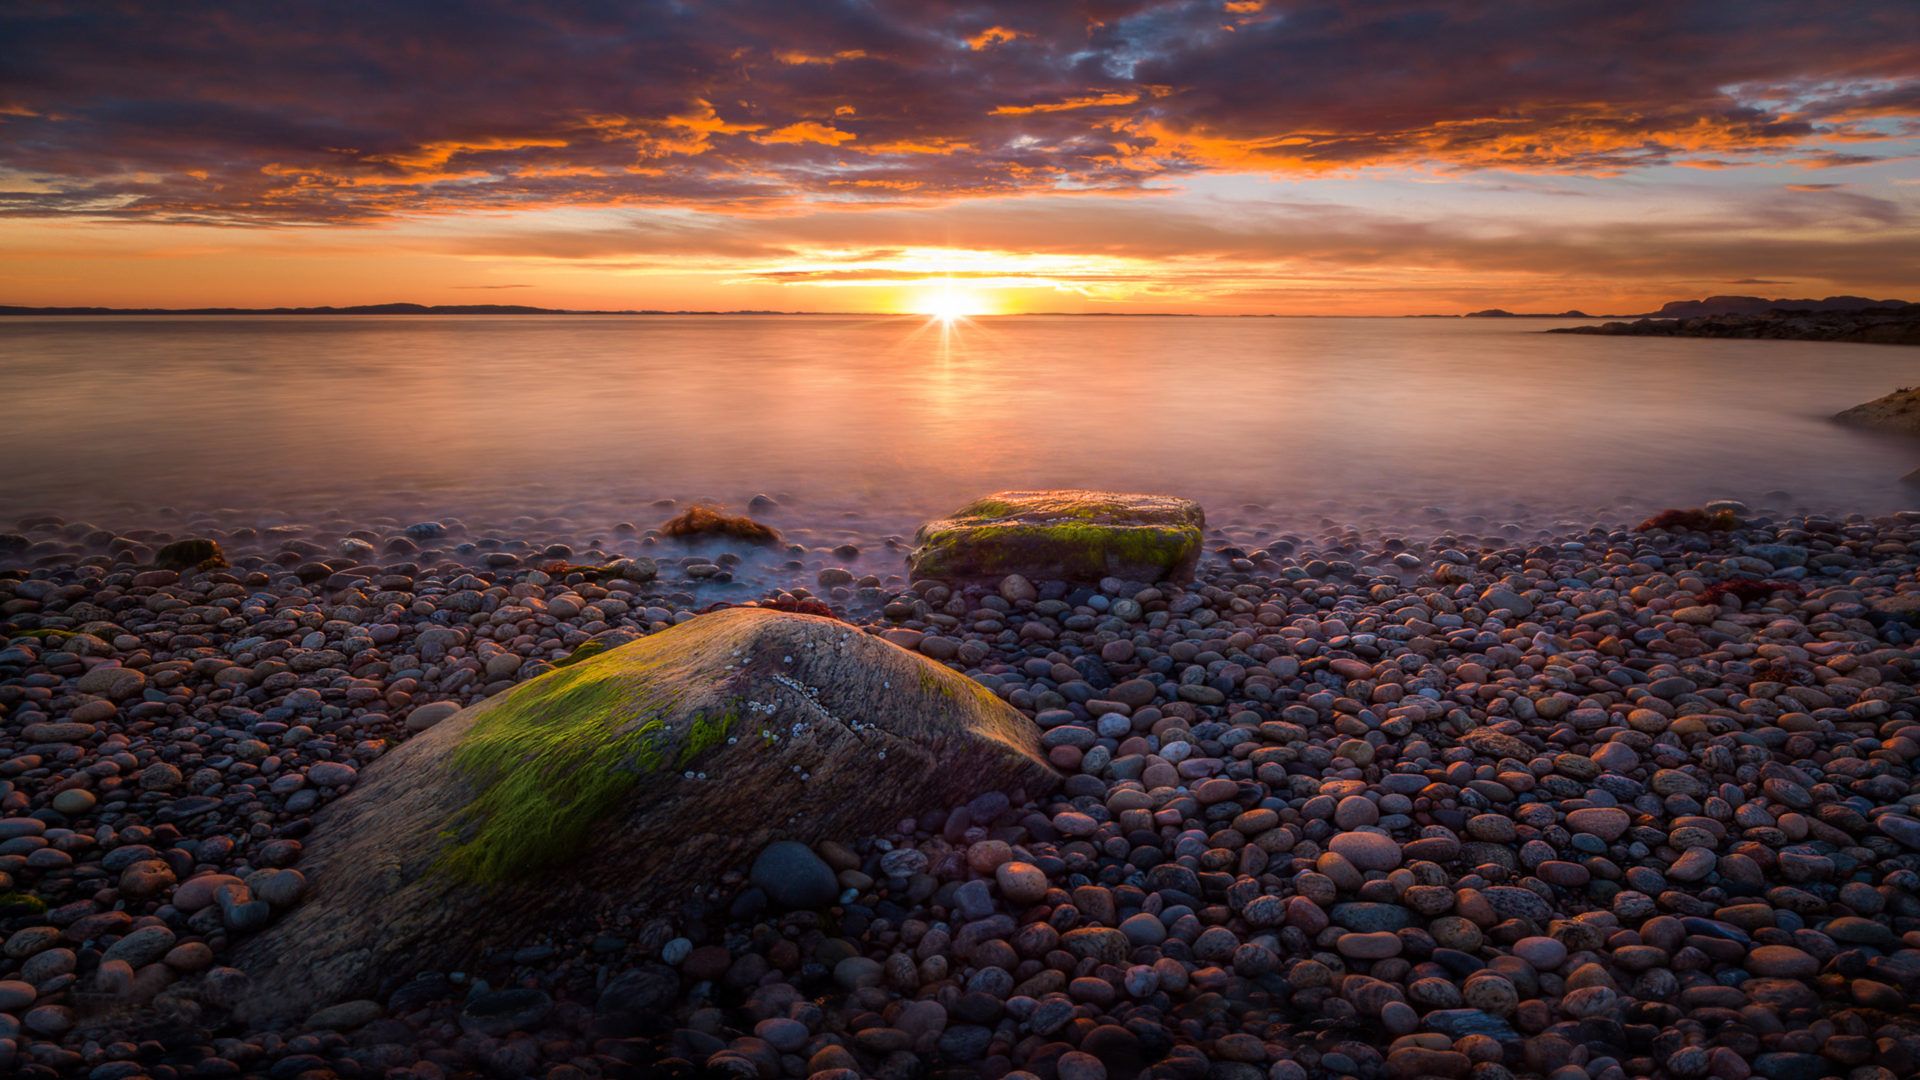 Sunset Coast Stone Beach Agdenes Municipality In Norway Summer Landscape Ultra HD Wallpaper For Desktop Mobile Phones And Lapx2400, Wallpaper13.com